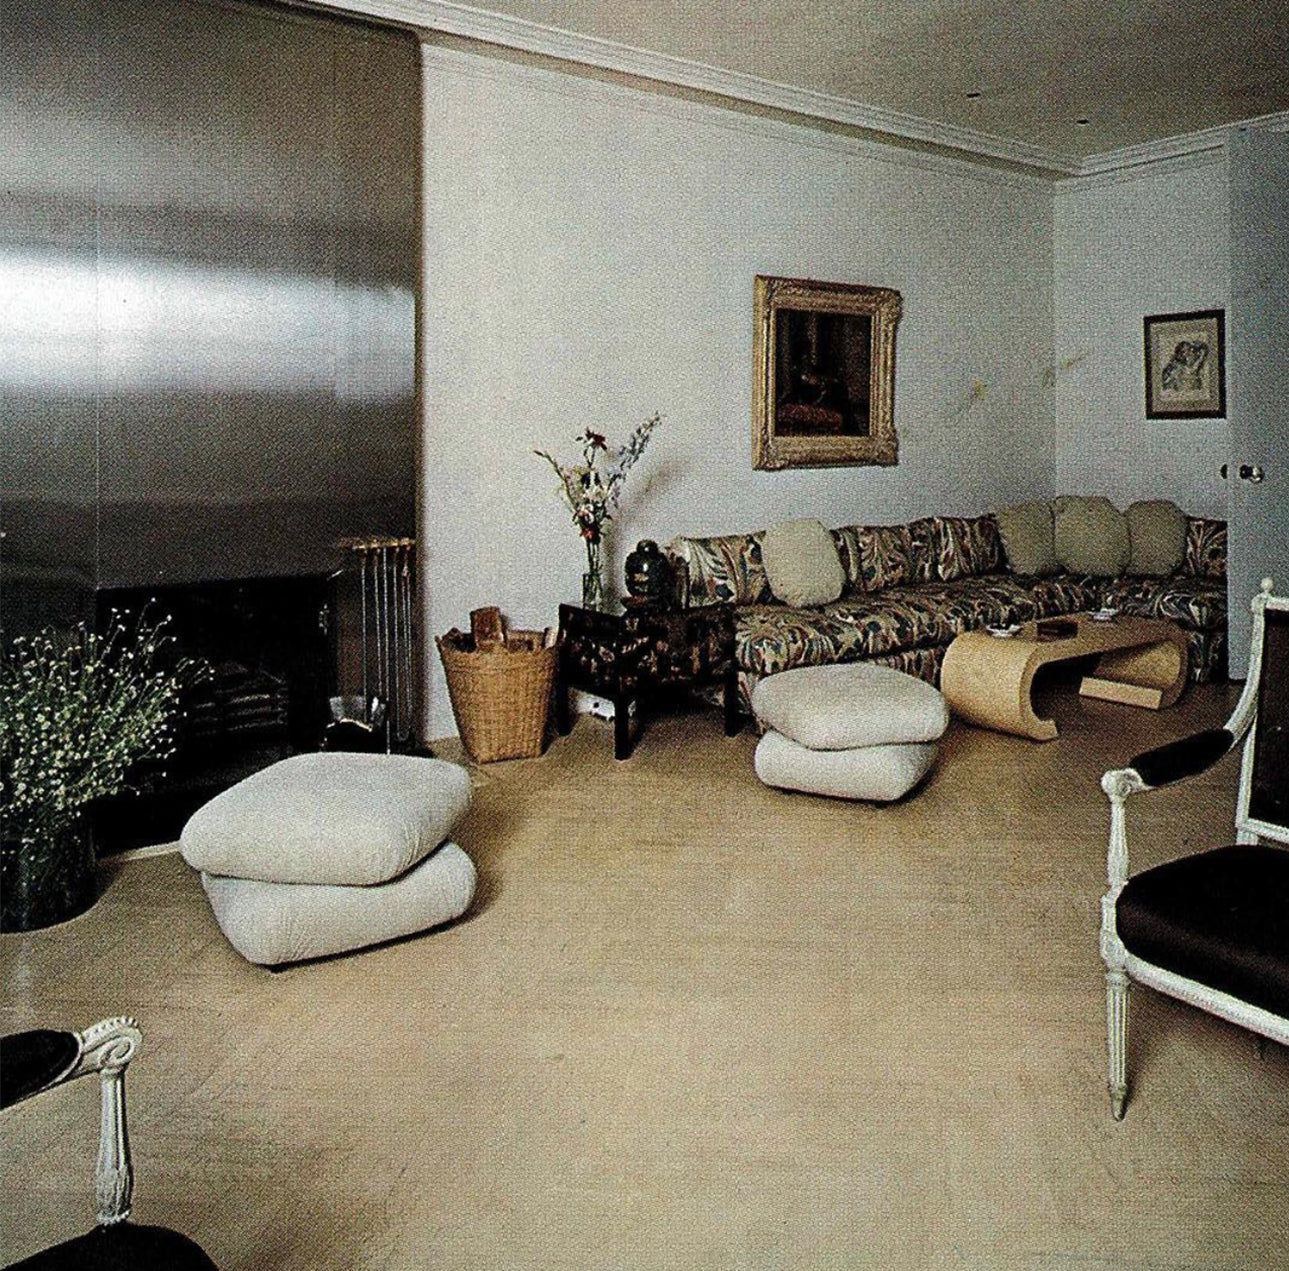 Low sofas and ottomans mix with Matisse and Bonnard. New York, 1978. 